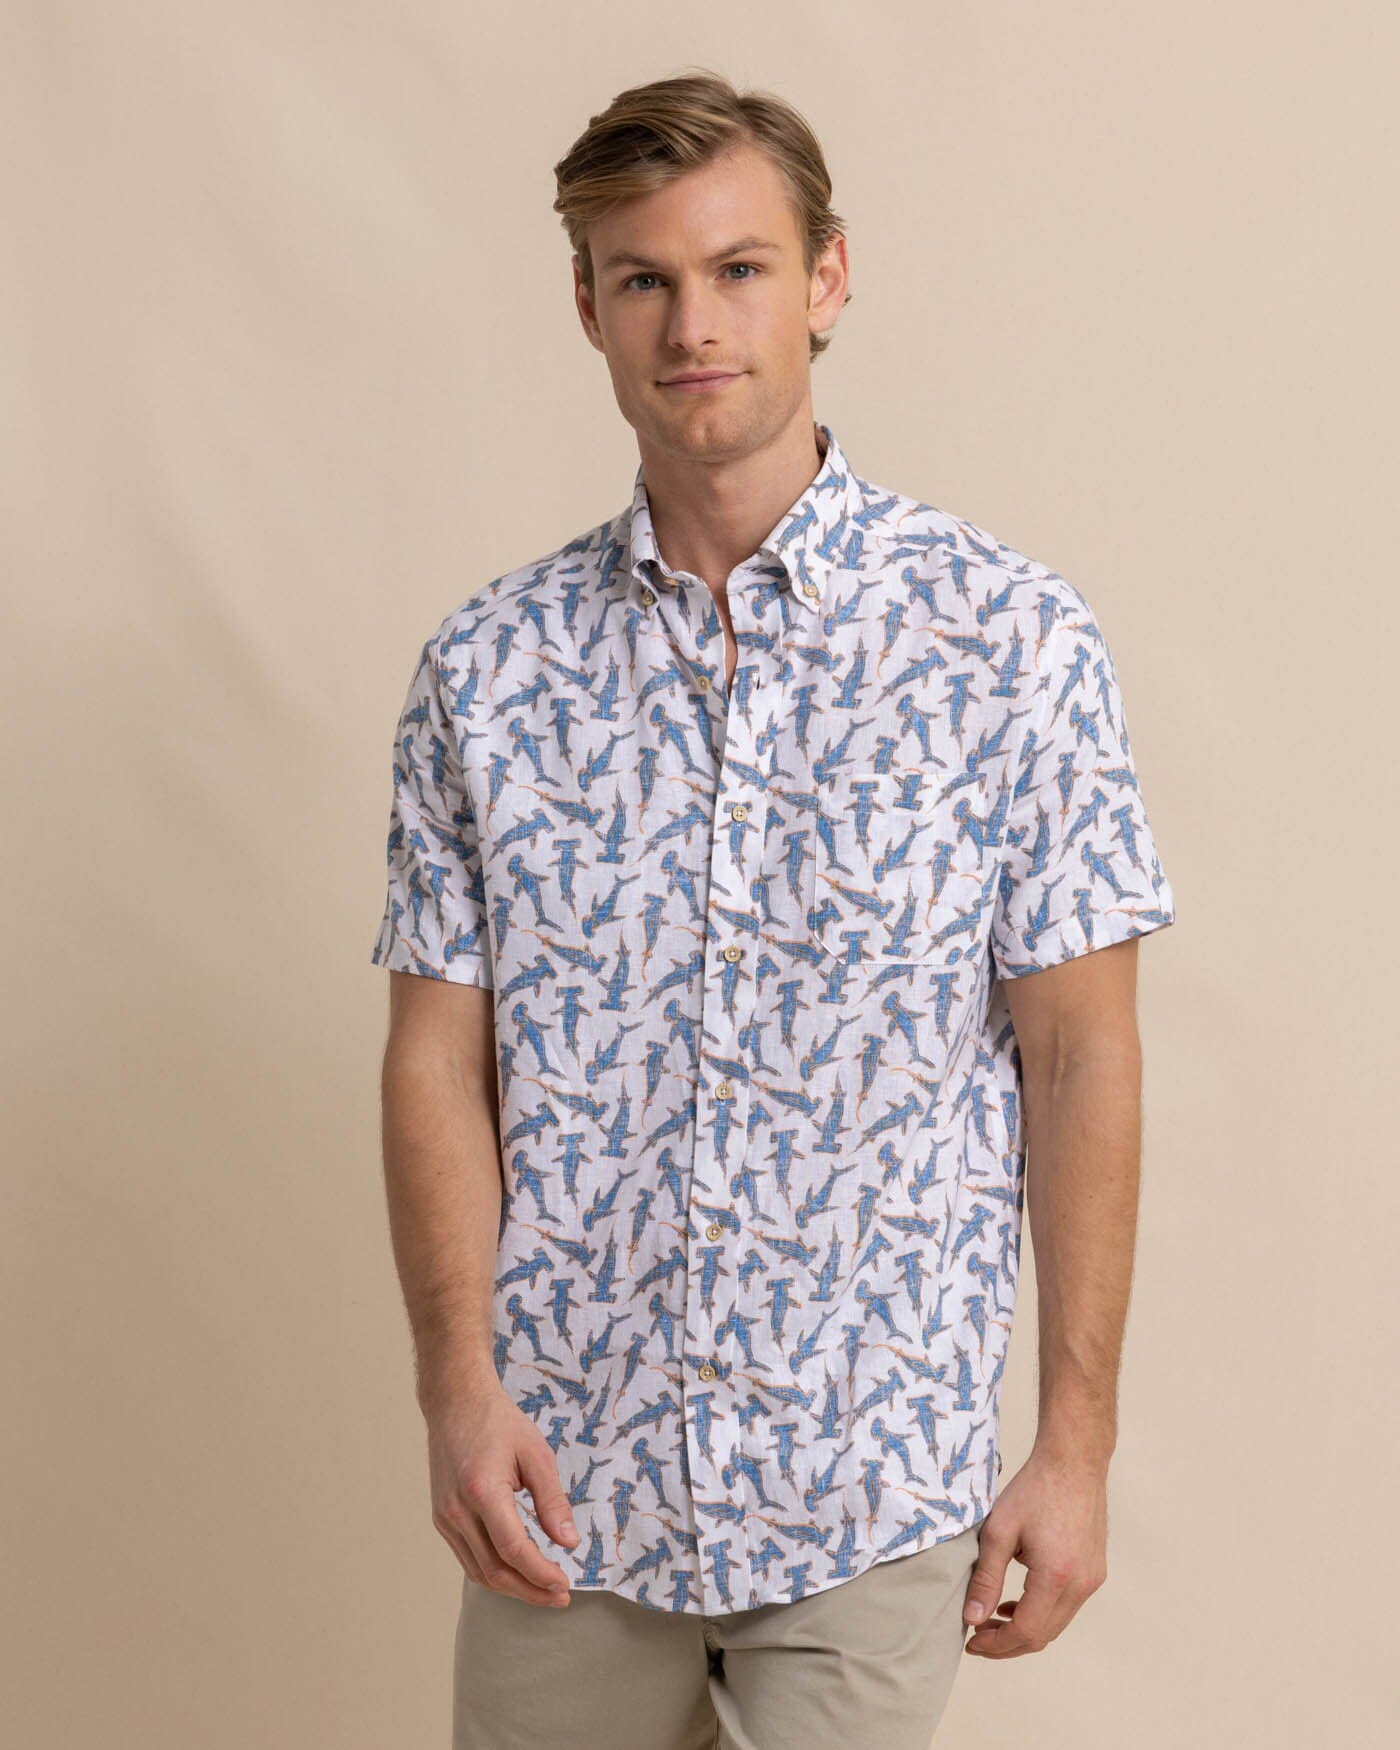 Men's Sport Shirts and Button Downs | Southern Tide